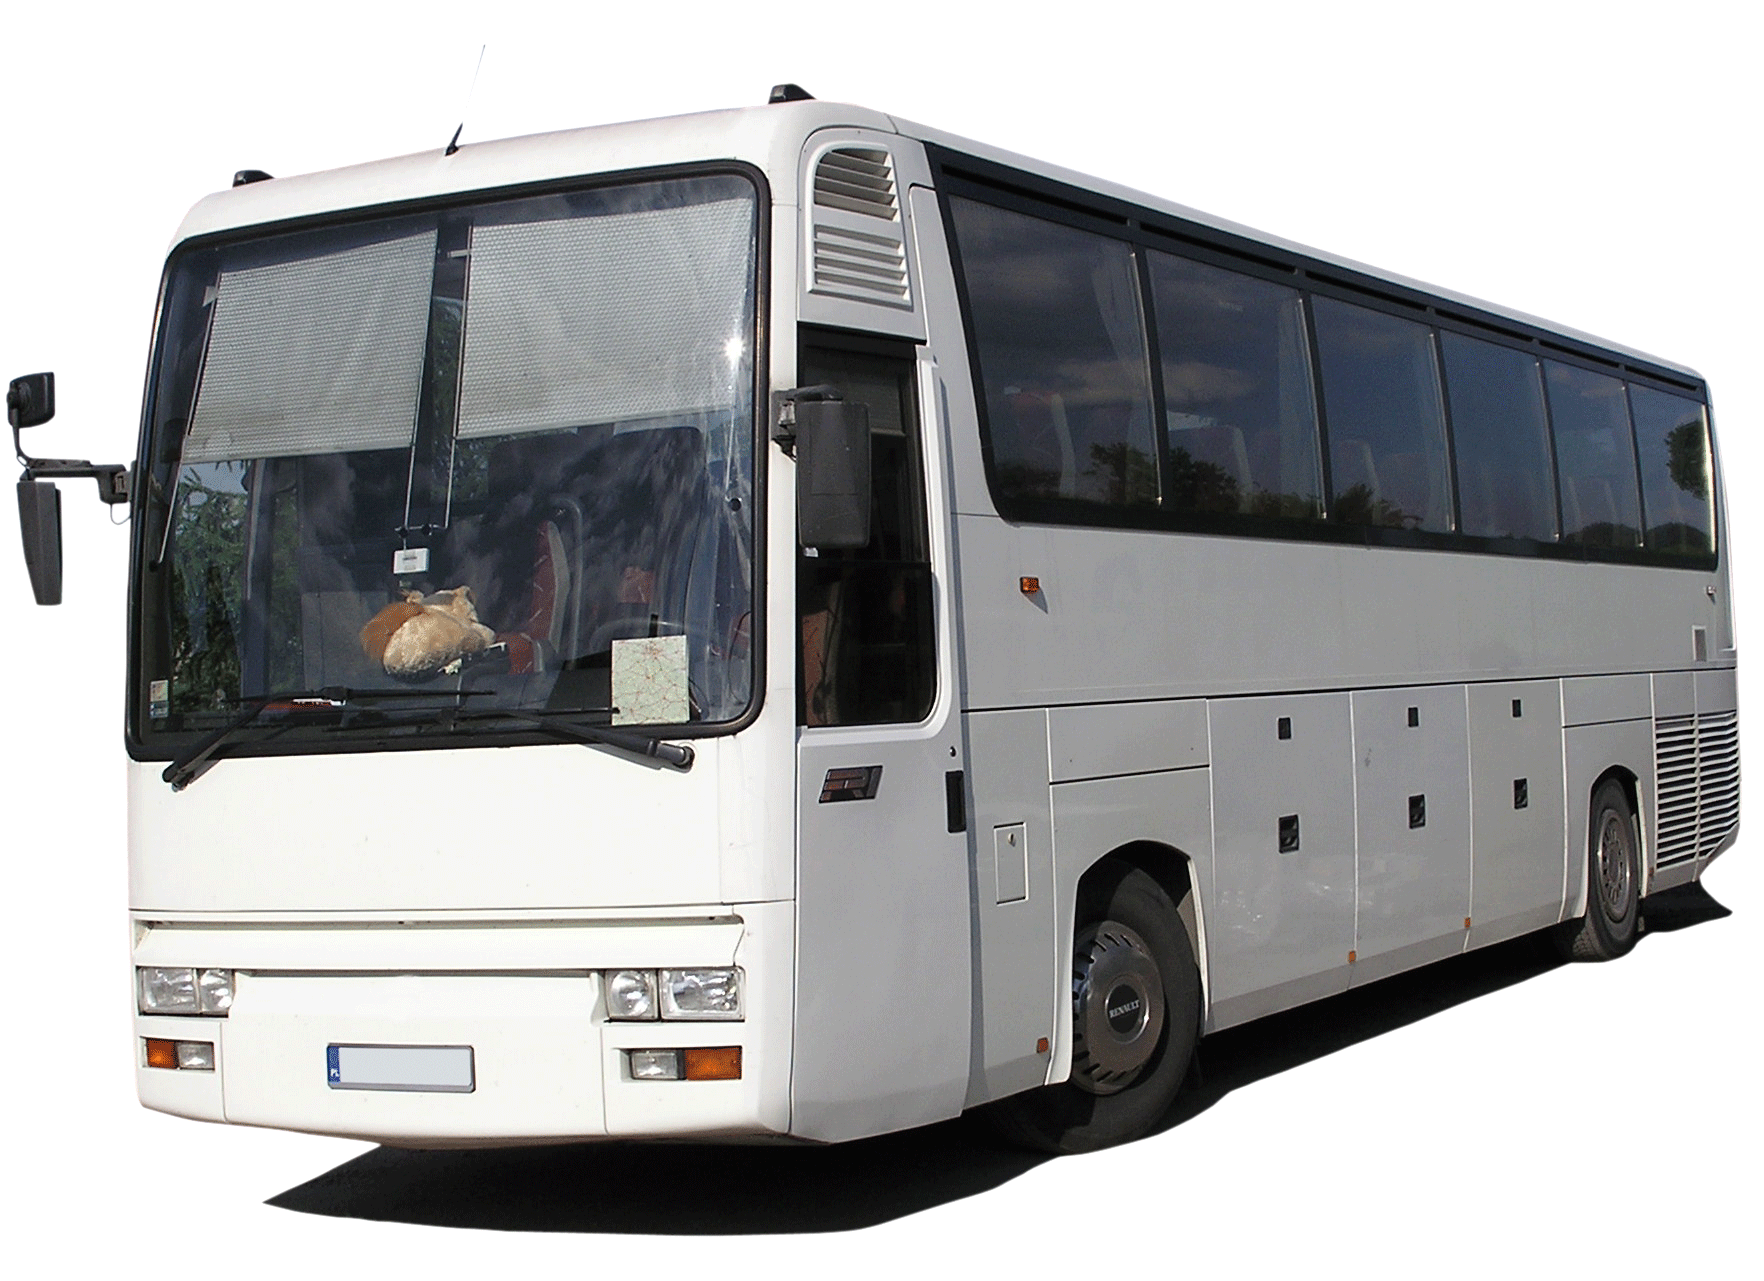 Free PNG Of Buses - 165671